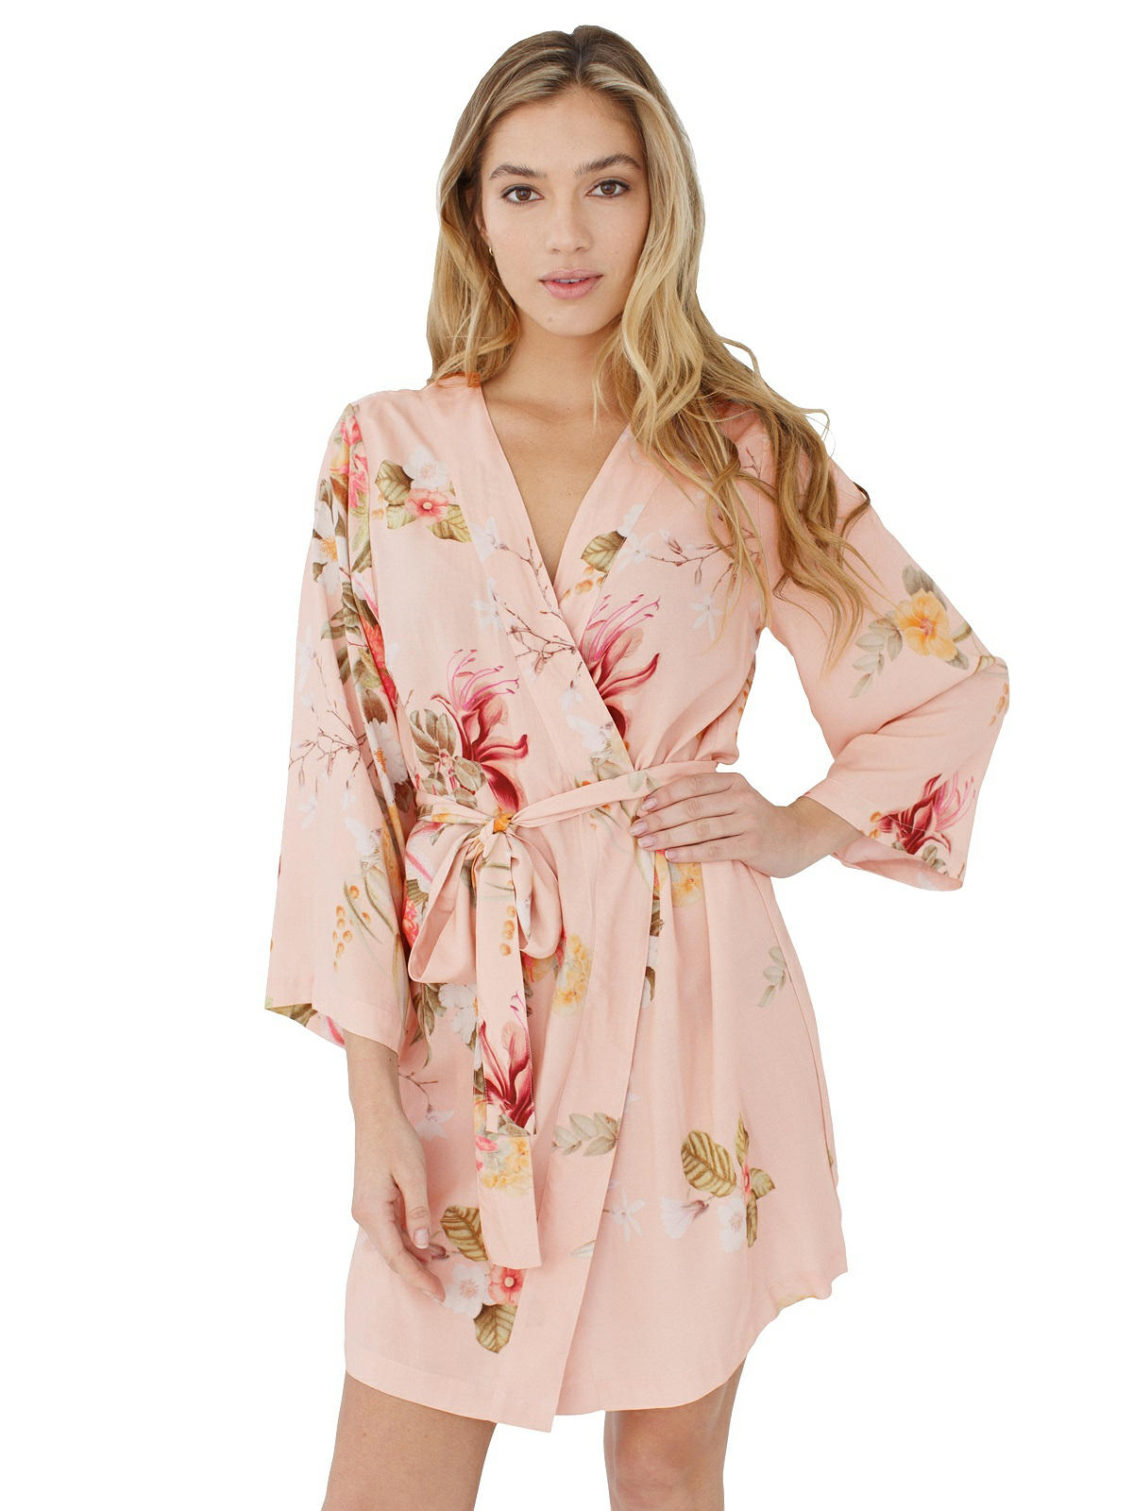 personalized bridesmaid robes